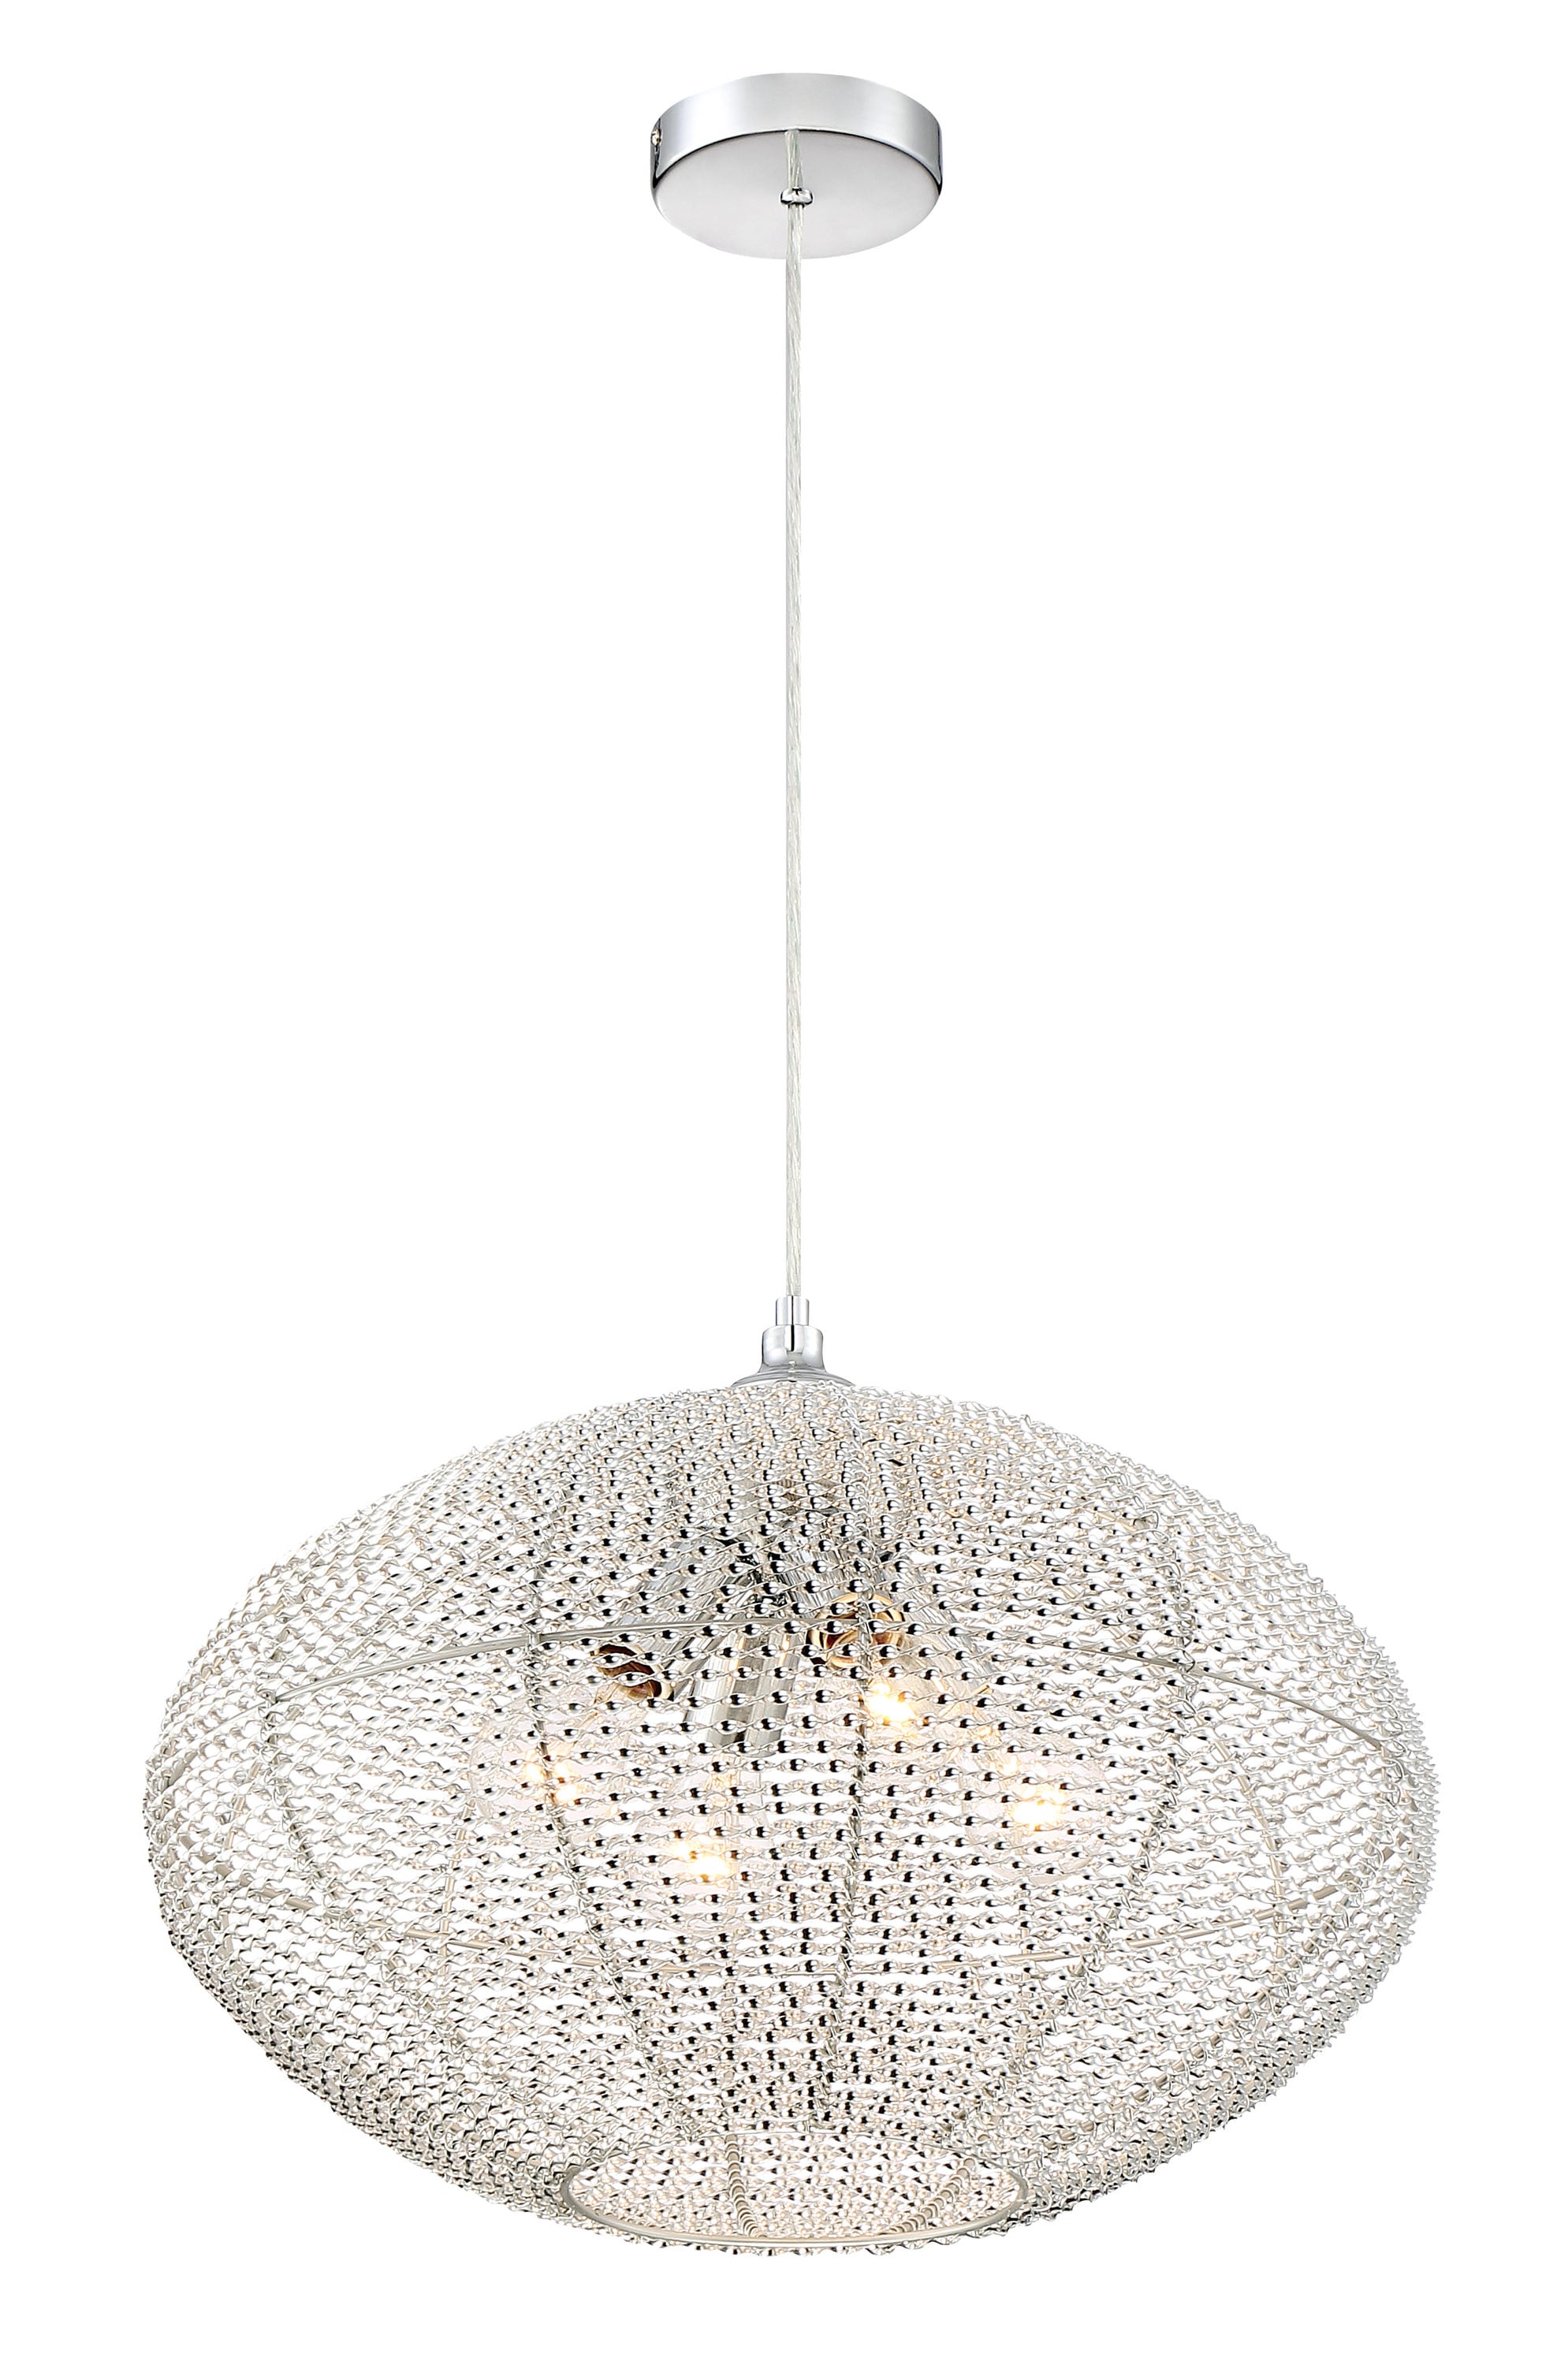 4-Light at Light Transitional Pendant Lighting Hanging Pendant Chrome in department Quoizel Tango the Polished Dome